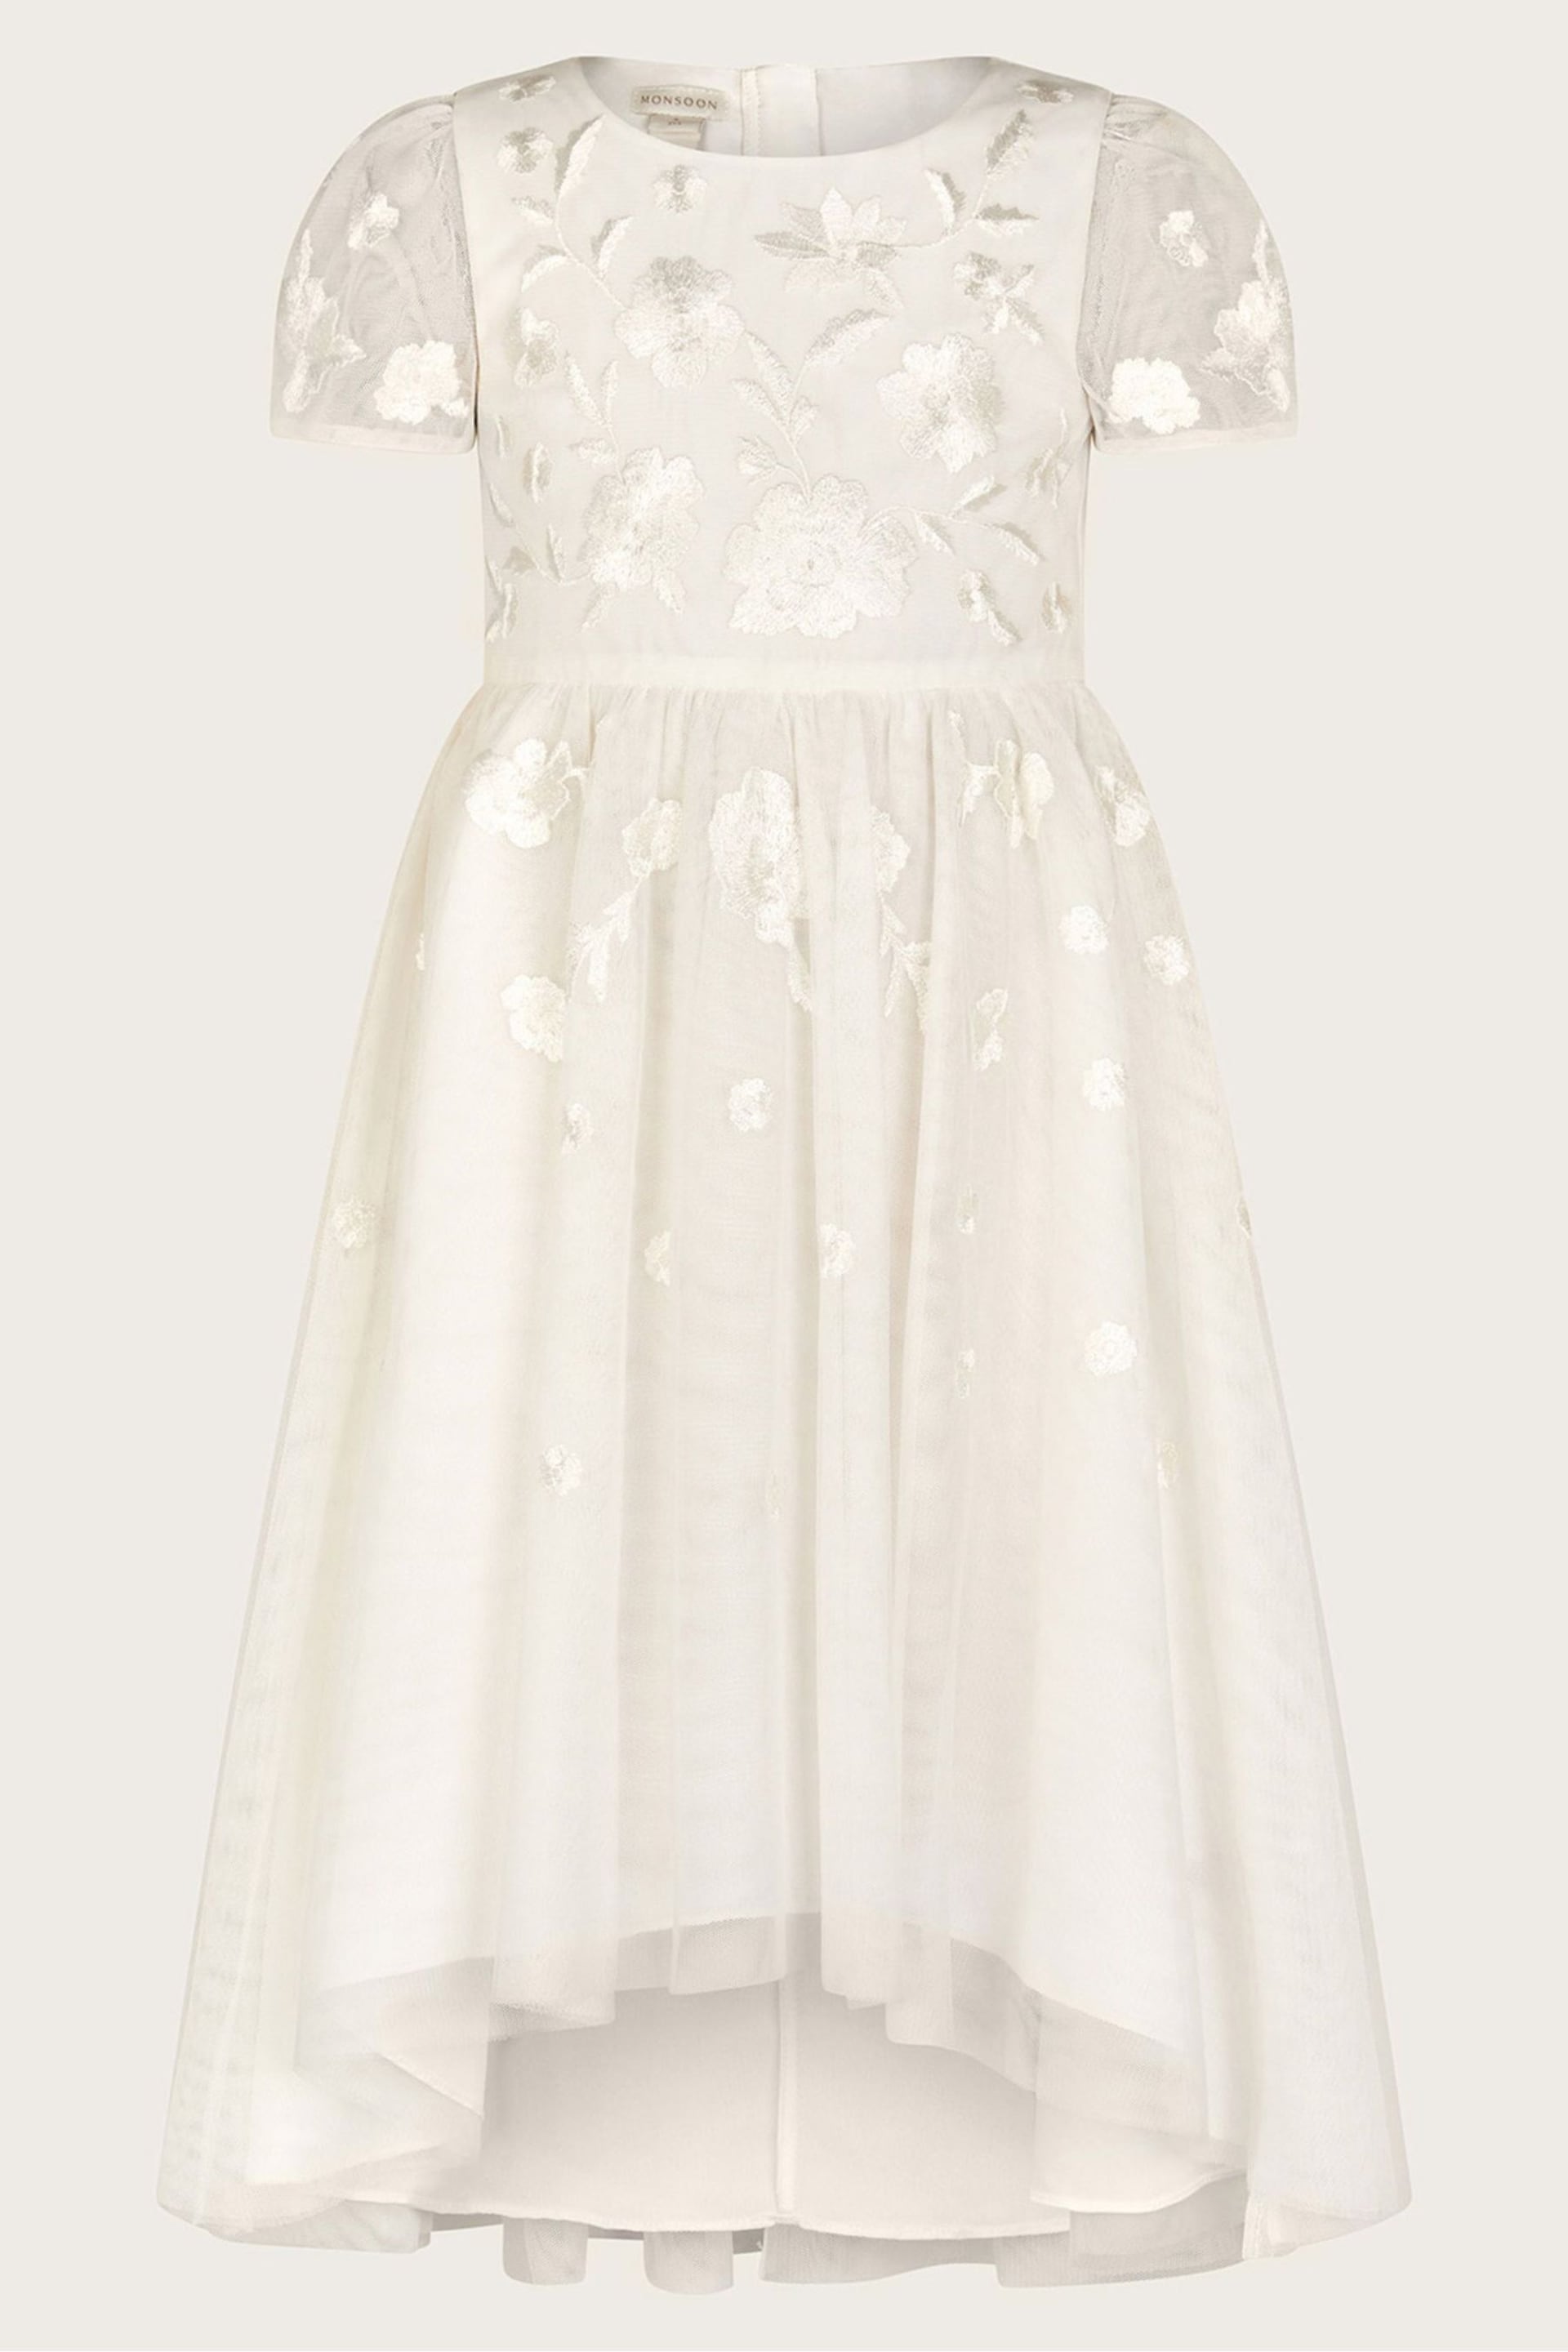 Monsoon Natural Luna Embroidered Dress - Image 1 of 3